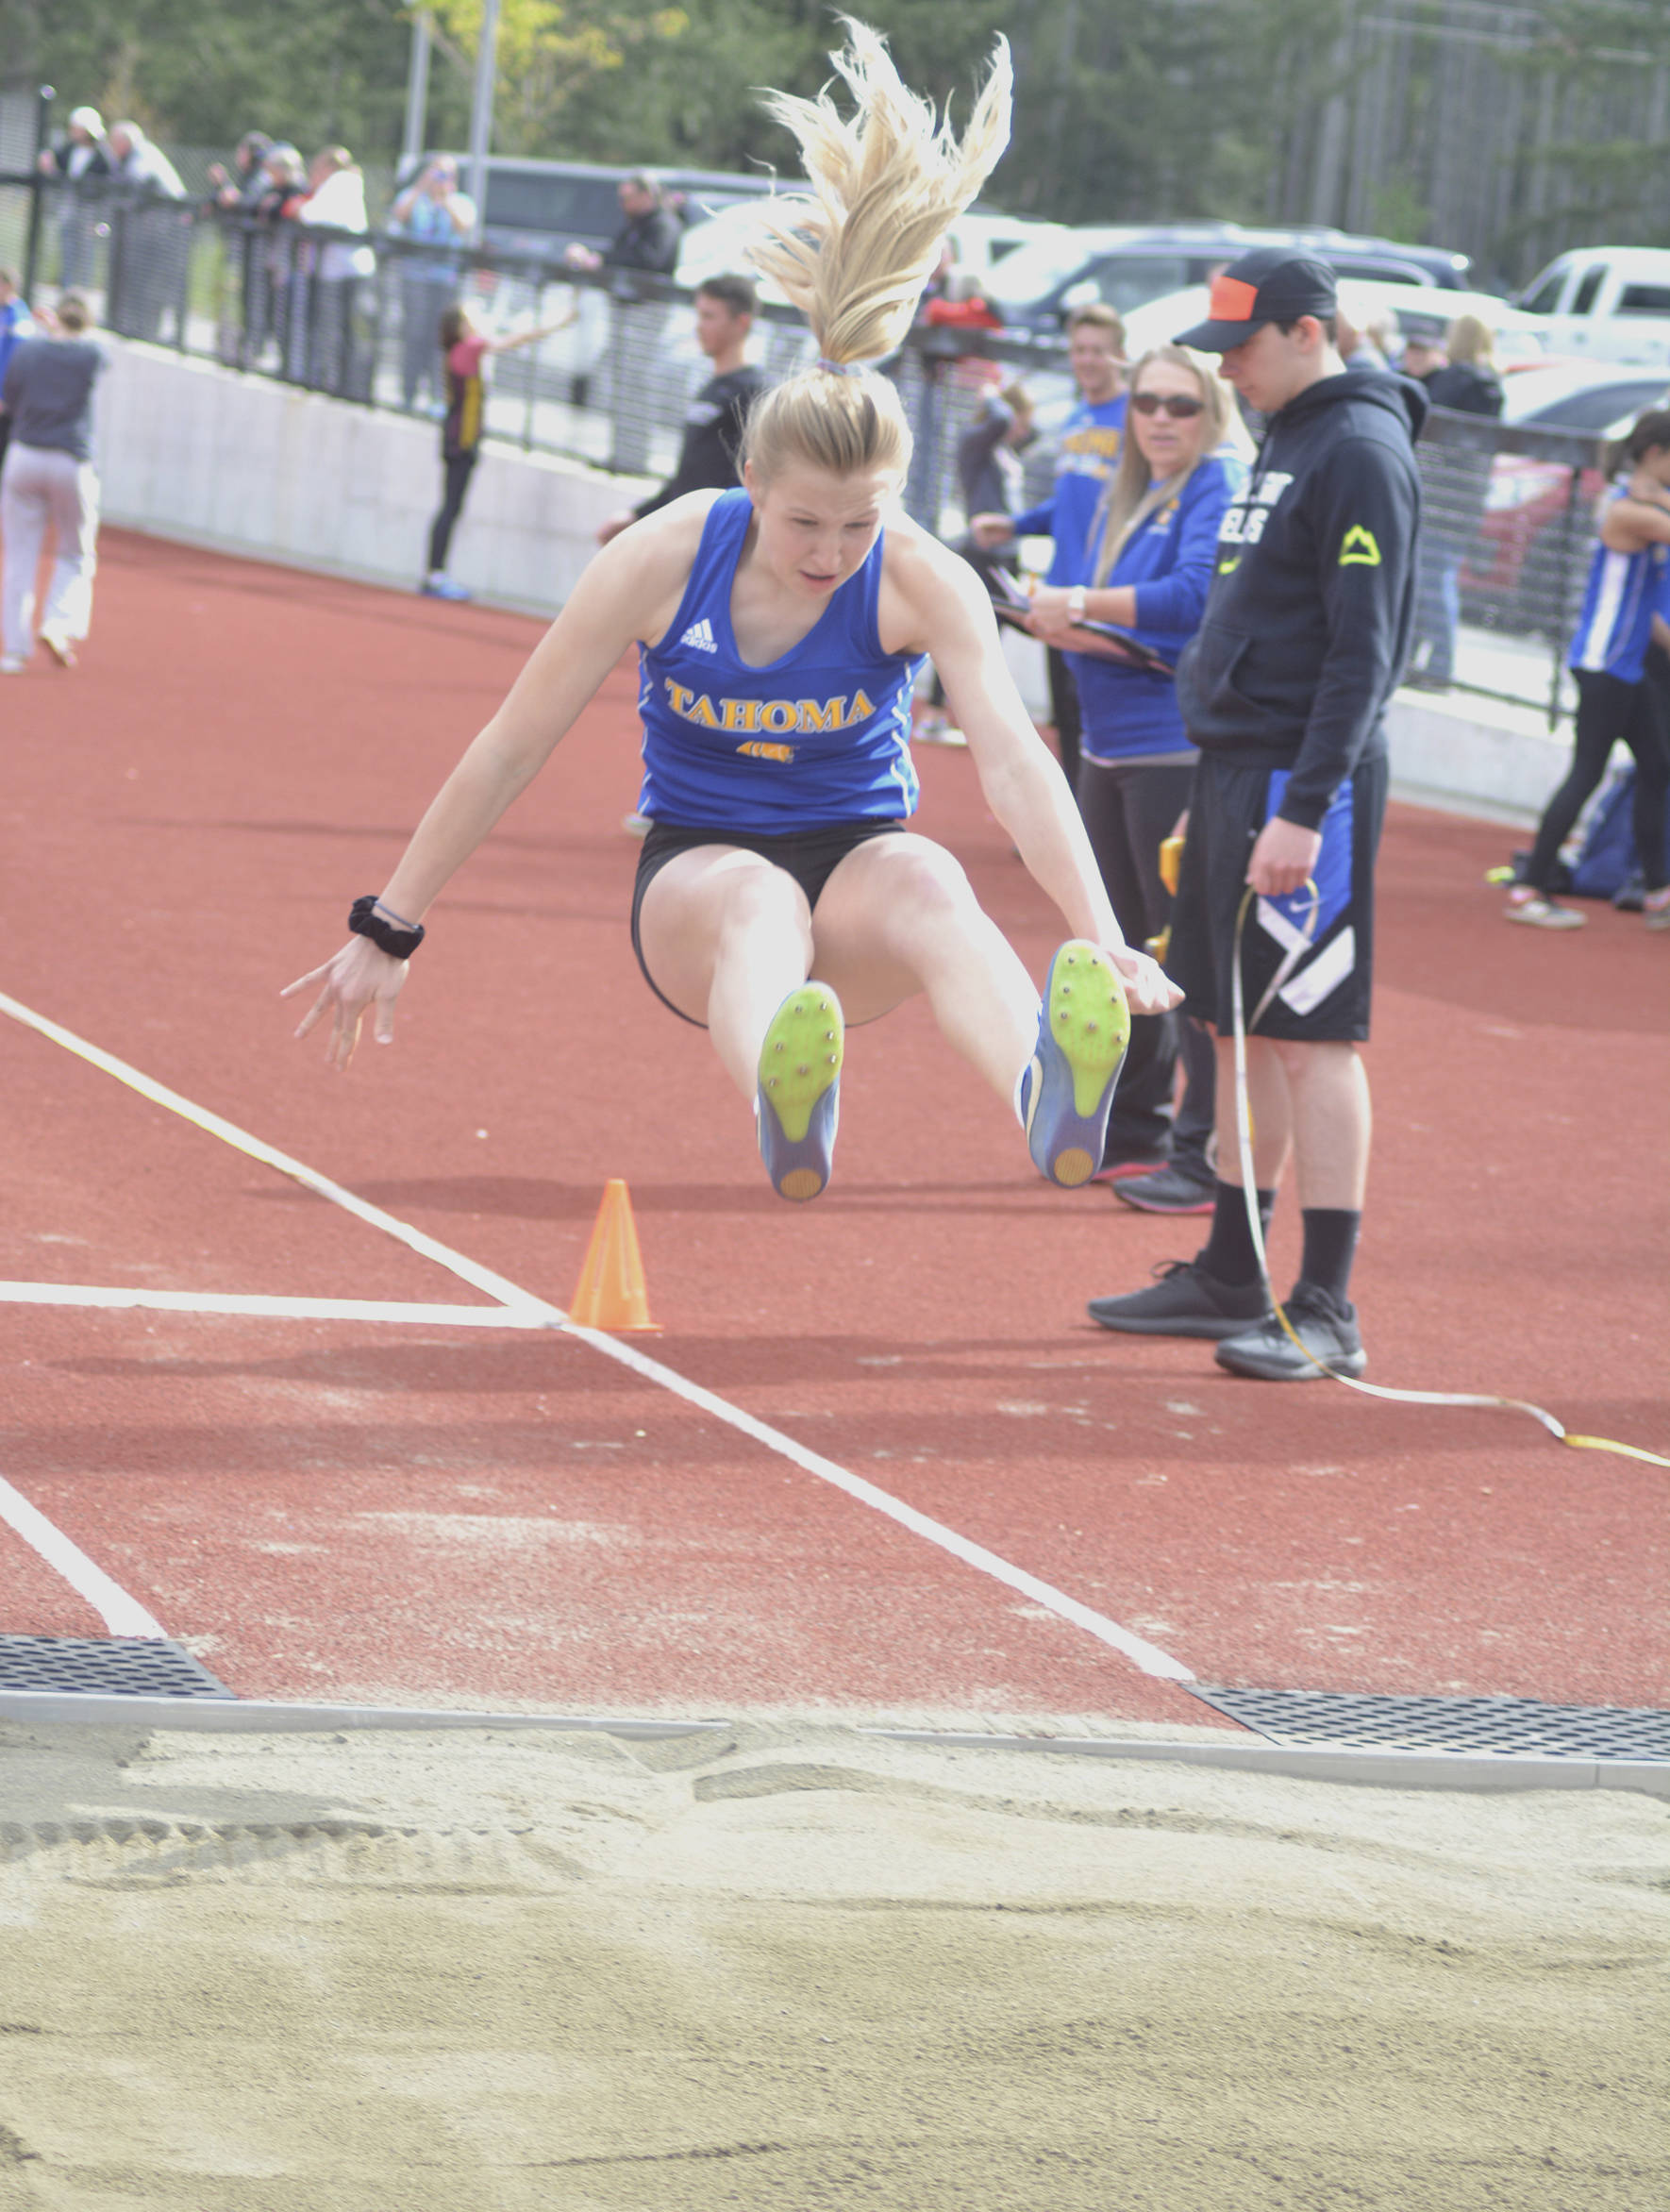 Tahoma track student Katie Welsh leaps into the sand during the long jump. File photo by Kayse Angel